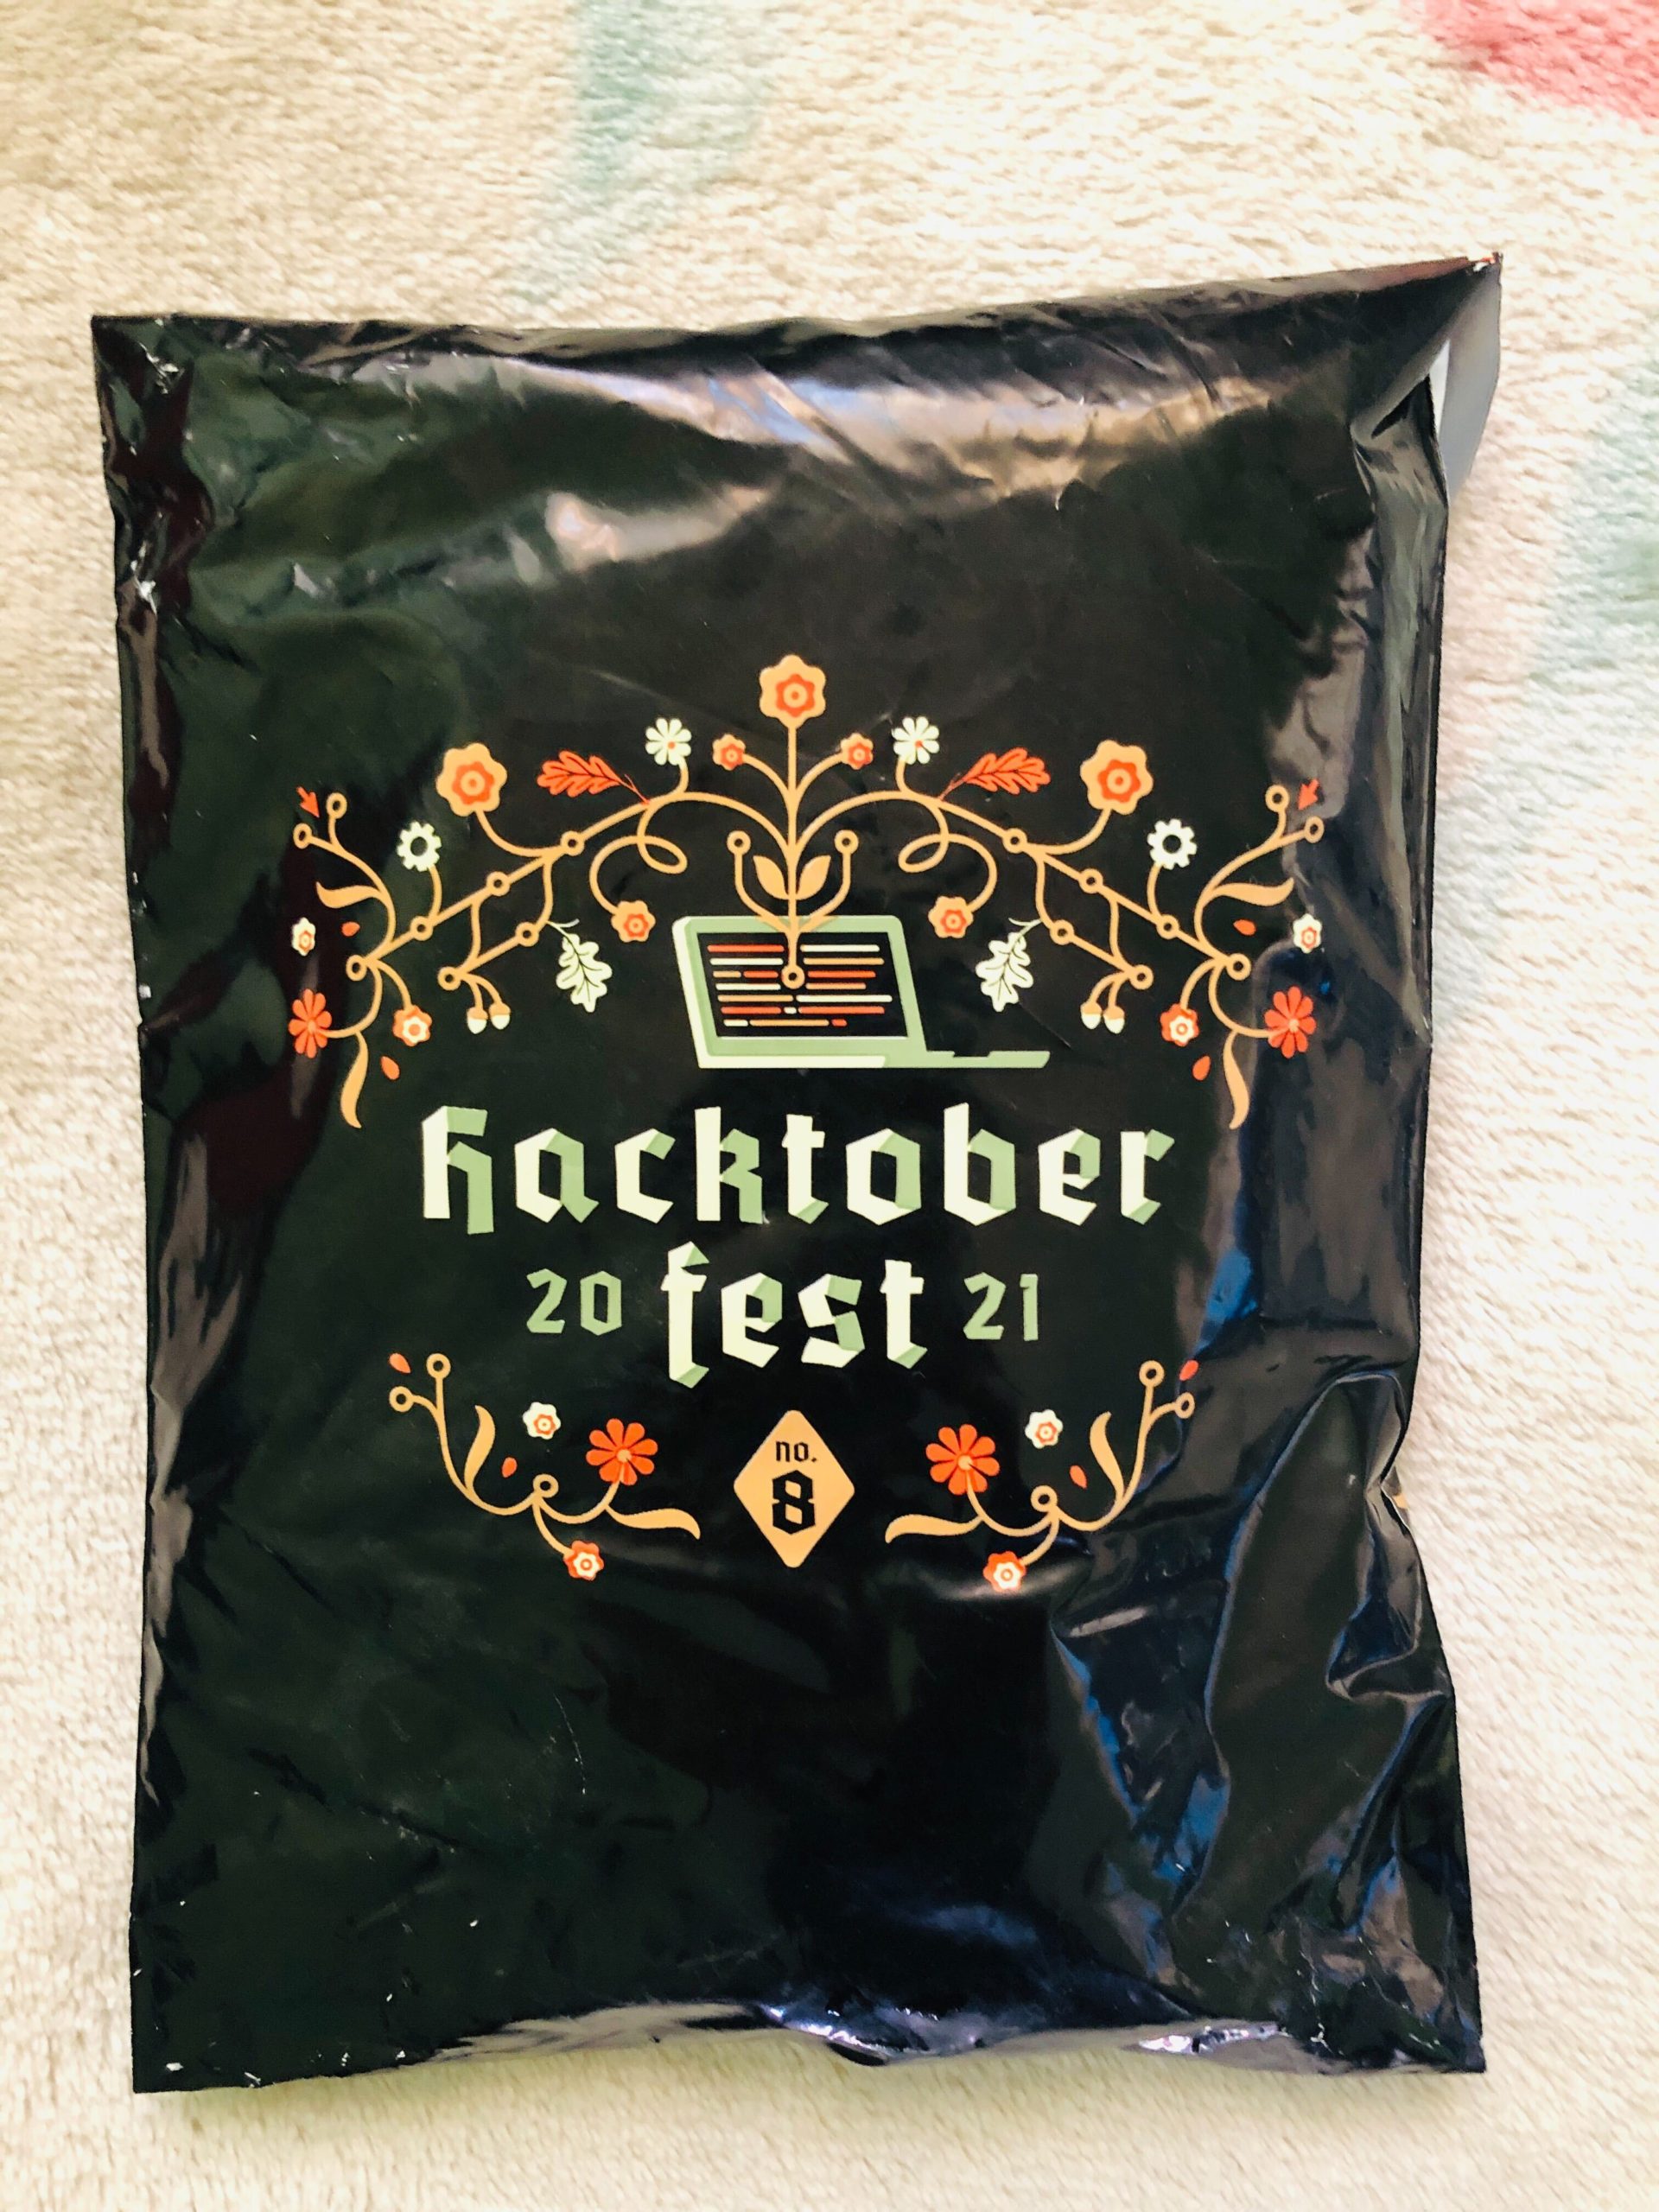 I received my Hactoberfest SWAGS 2021!